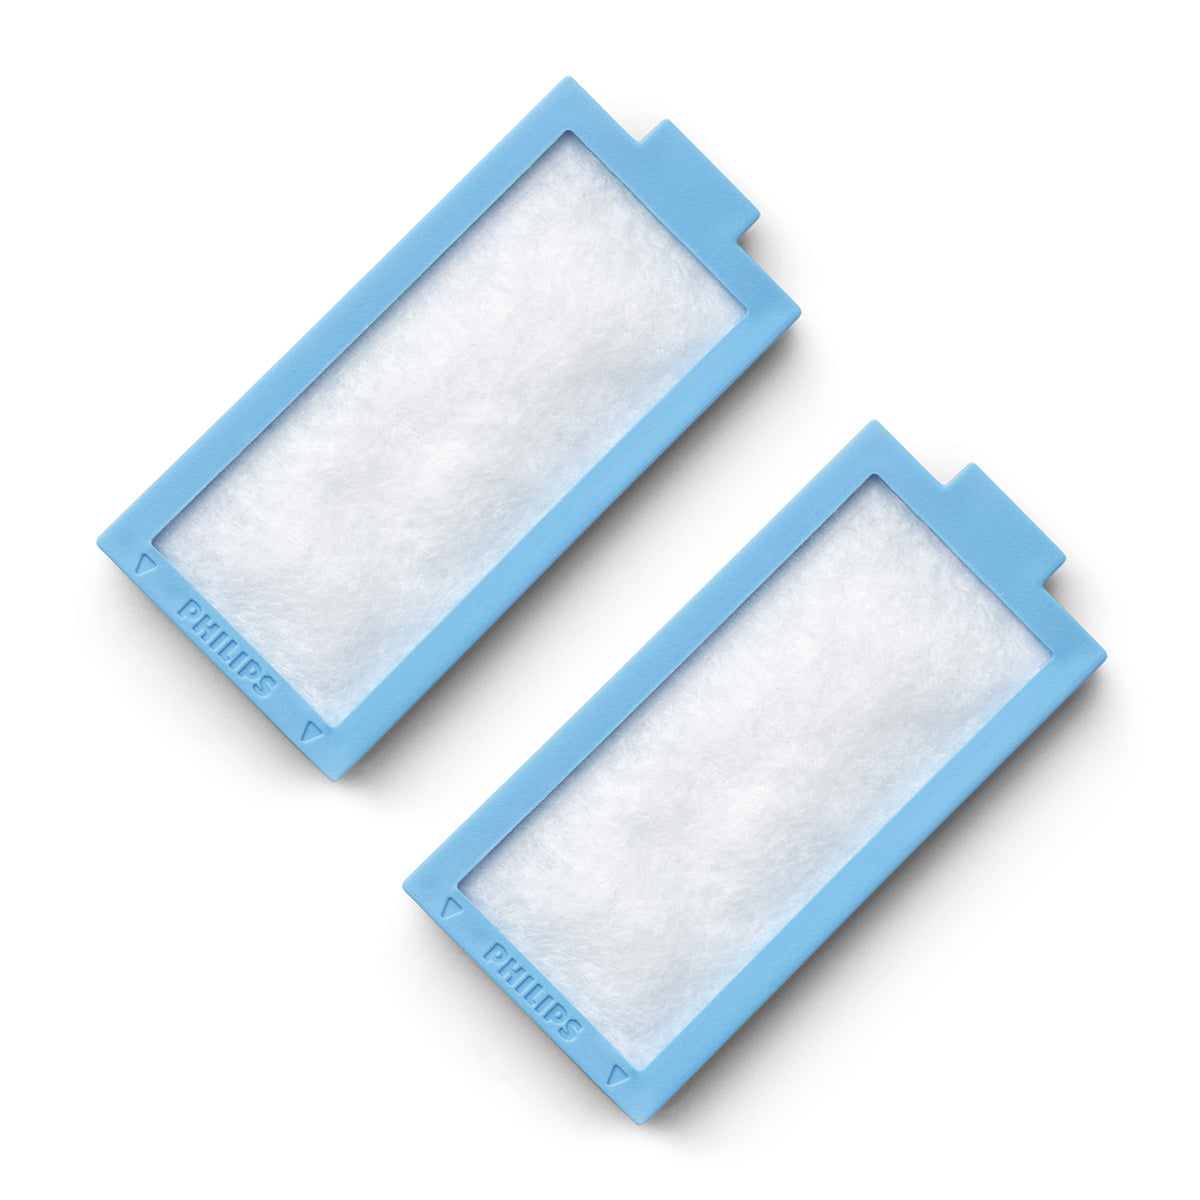 Ultra Fine Filter for DreamStation 2 Series CPAP/BiPAP Machines (2 Pack)